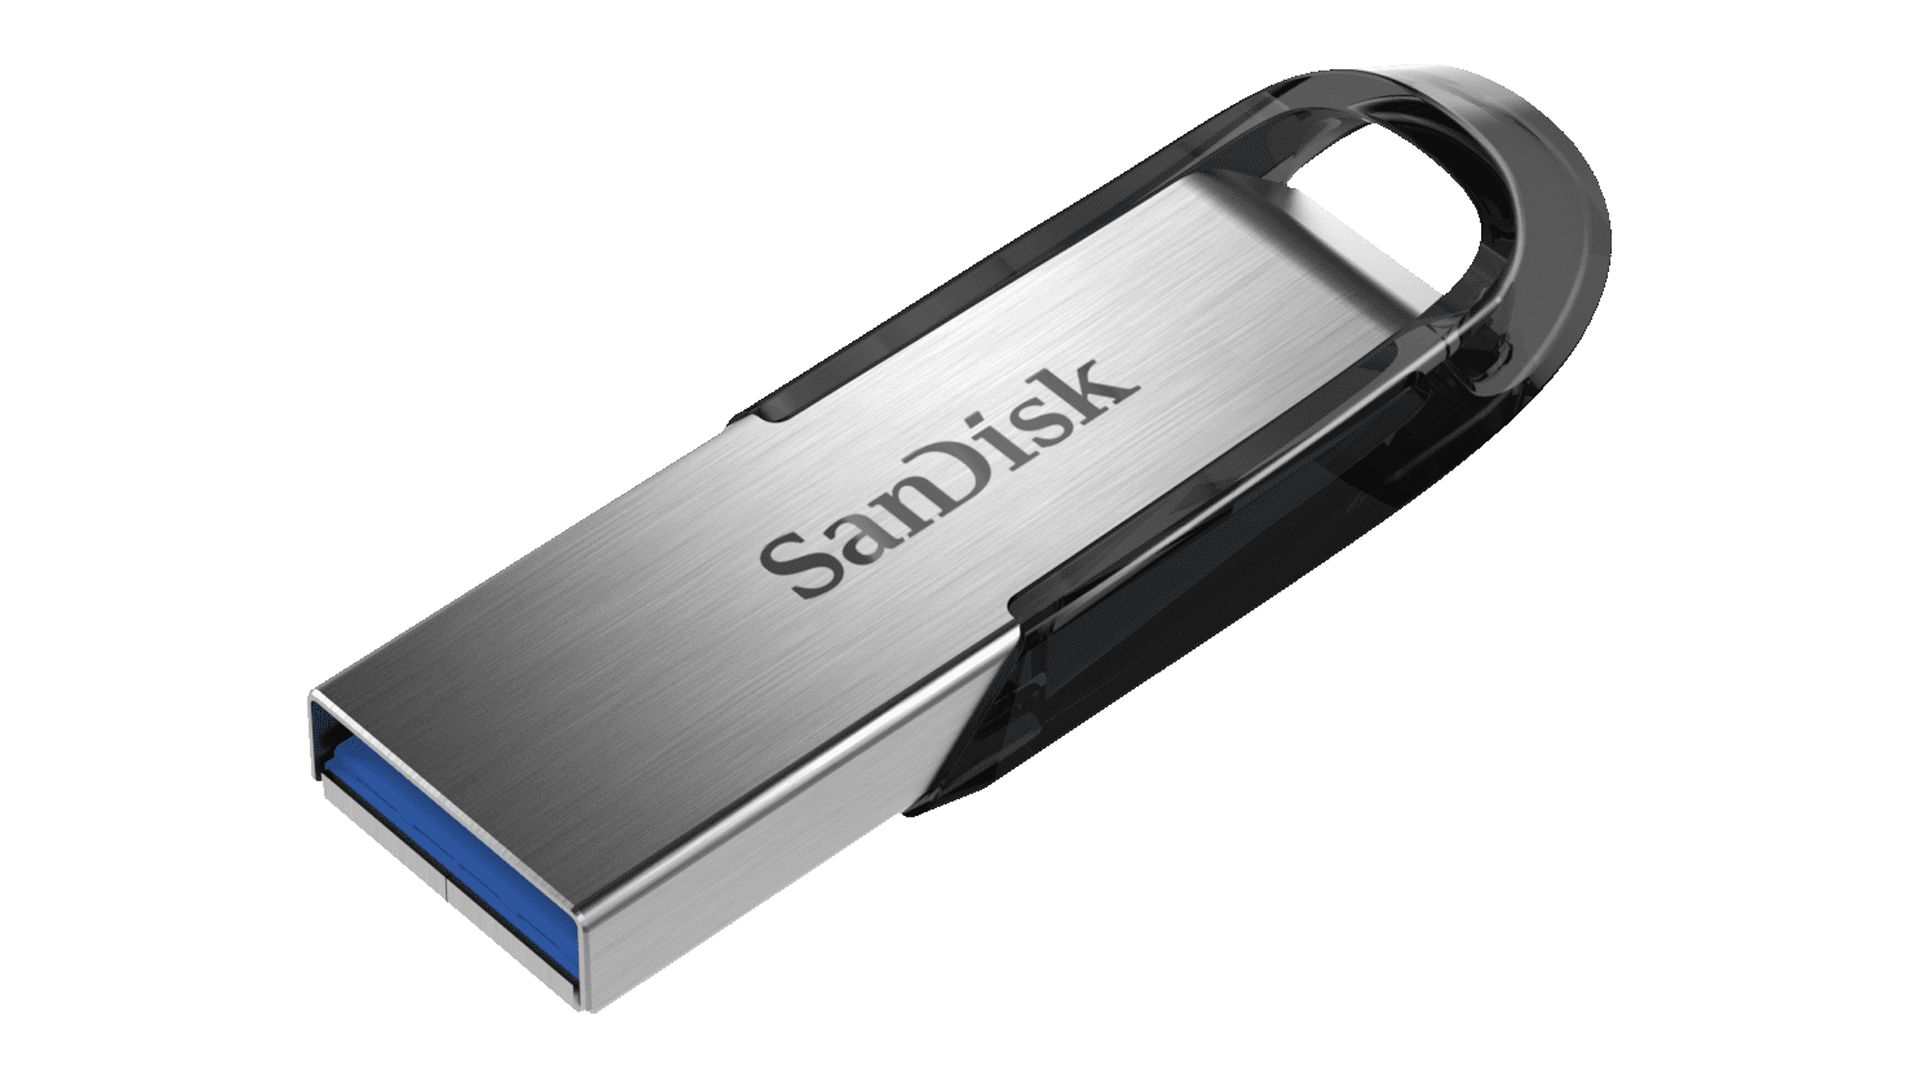 SanDisk 32GB Ultra Flair™ USB 3.0 Flash Drive - SDCZ73-032G-A46 - image 2 of 4